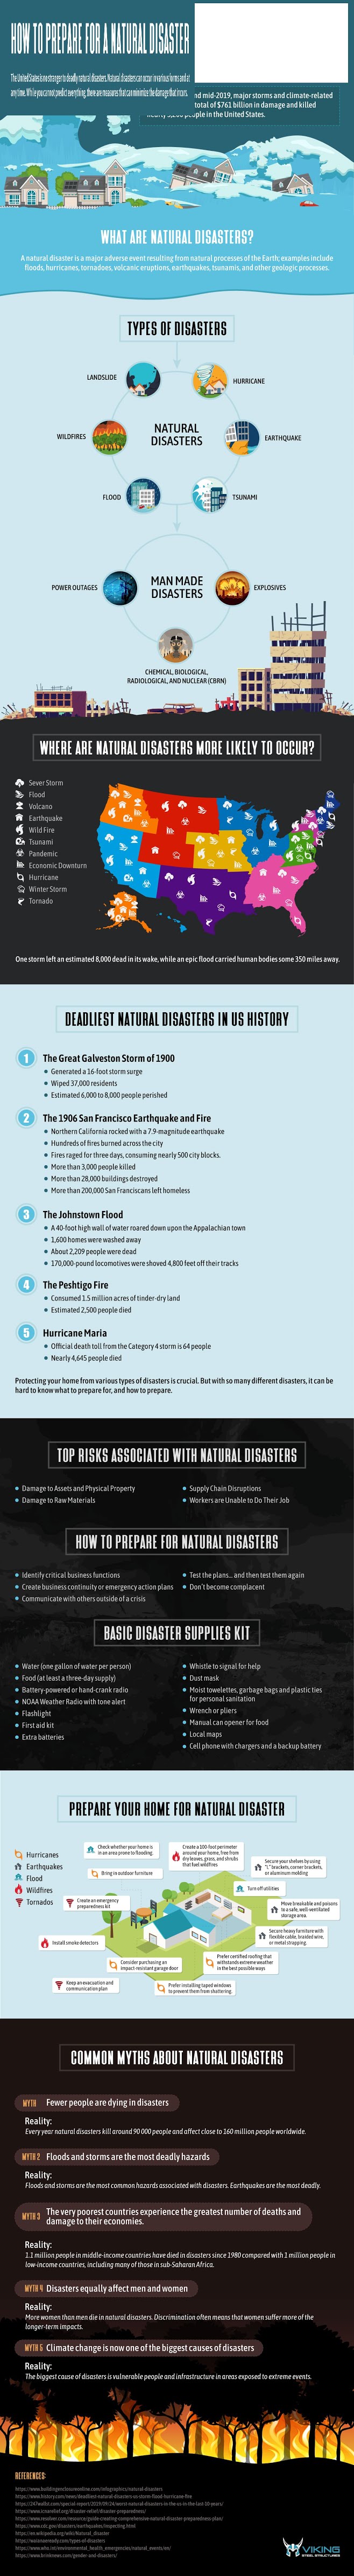 How To Prepare for a Natural Disaster  #infographic